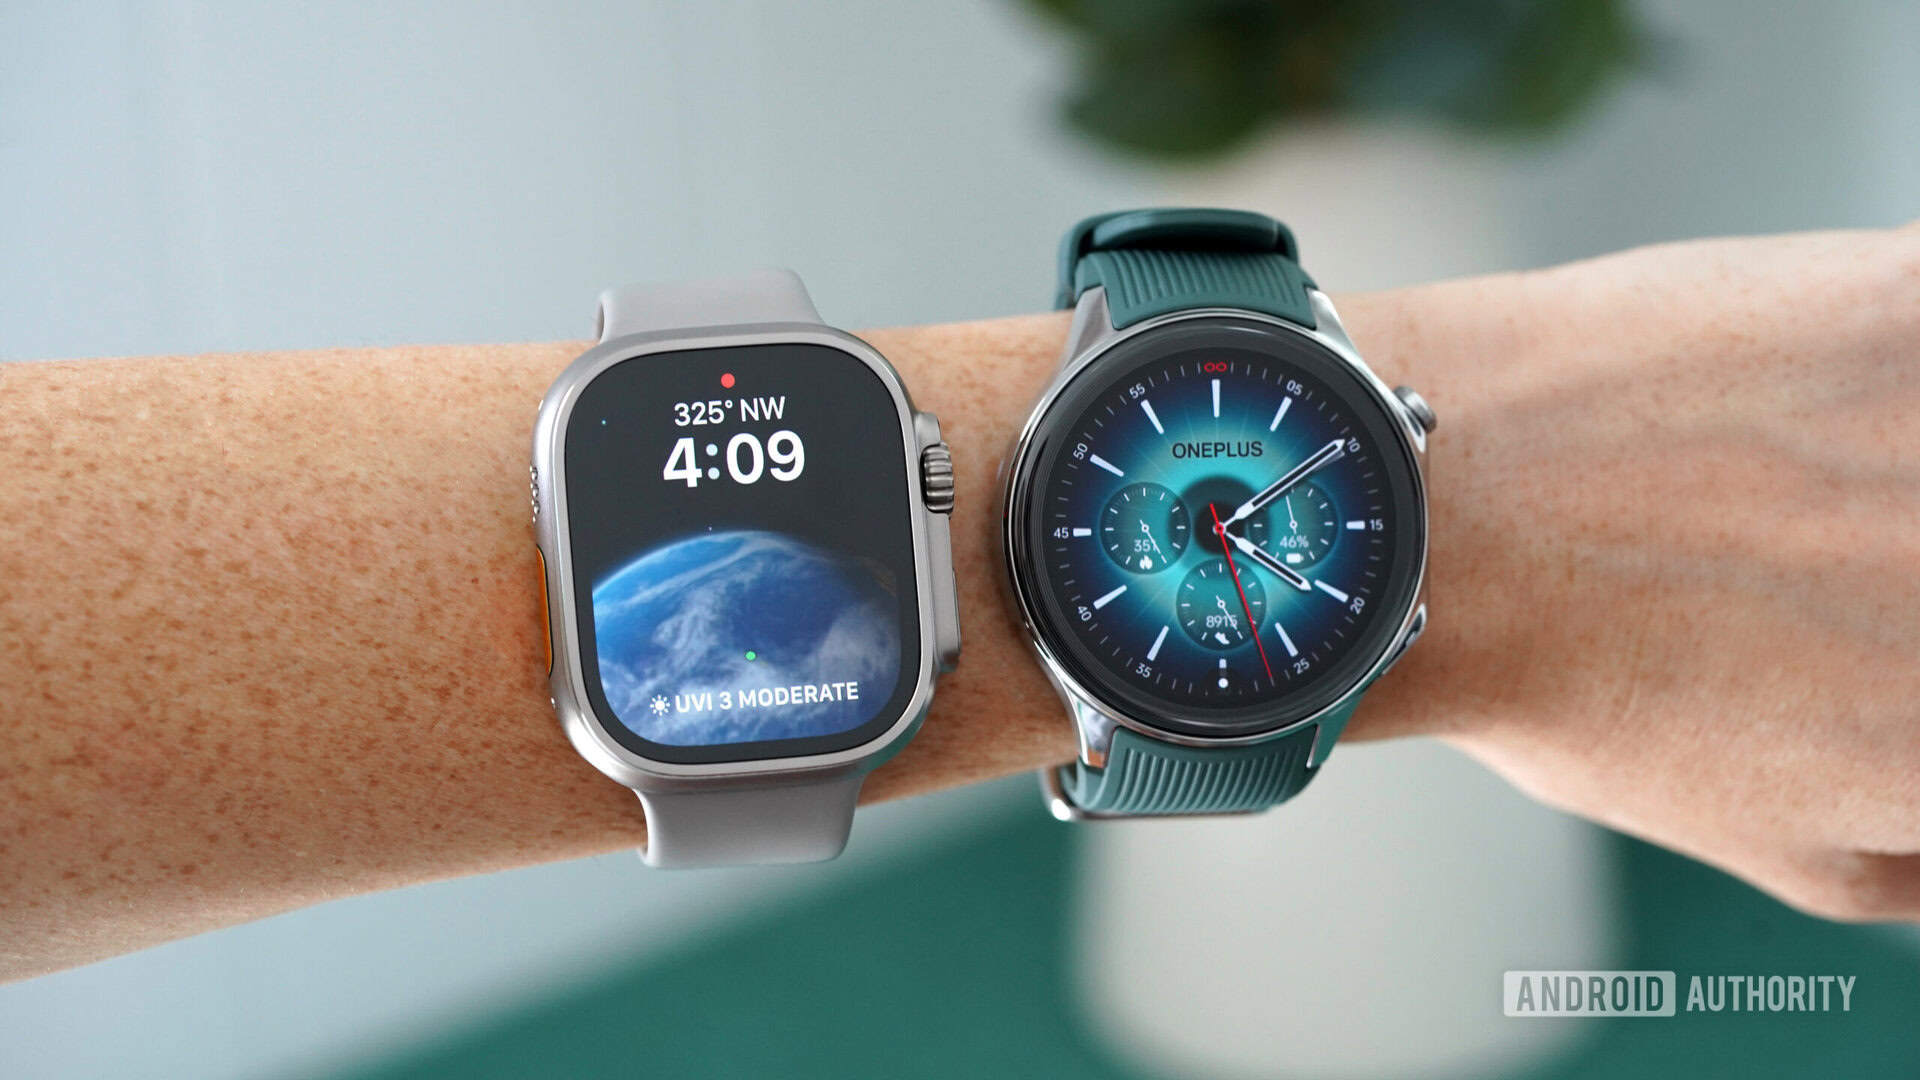 Apple tried to make the Apple Watch work with Android